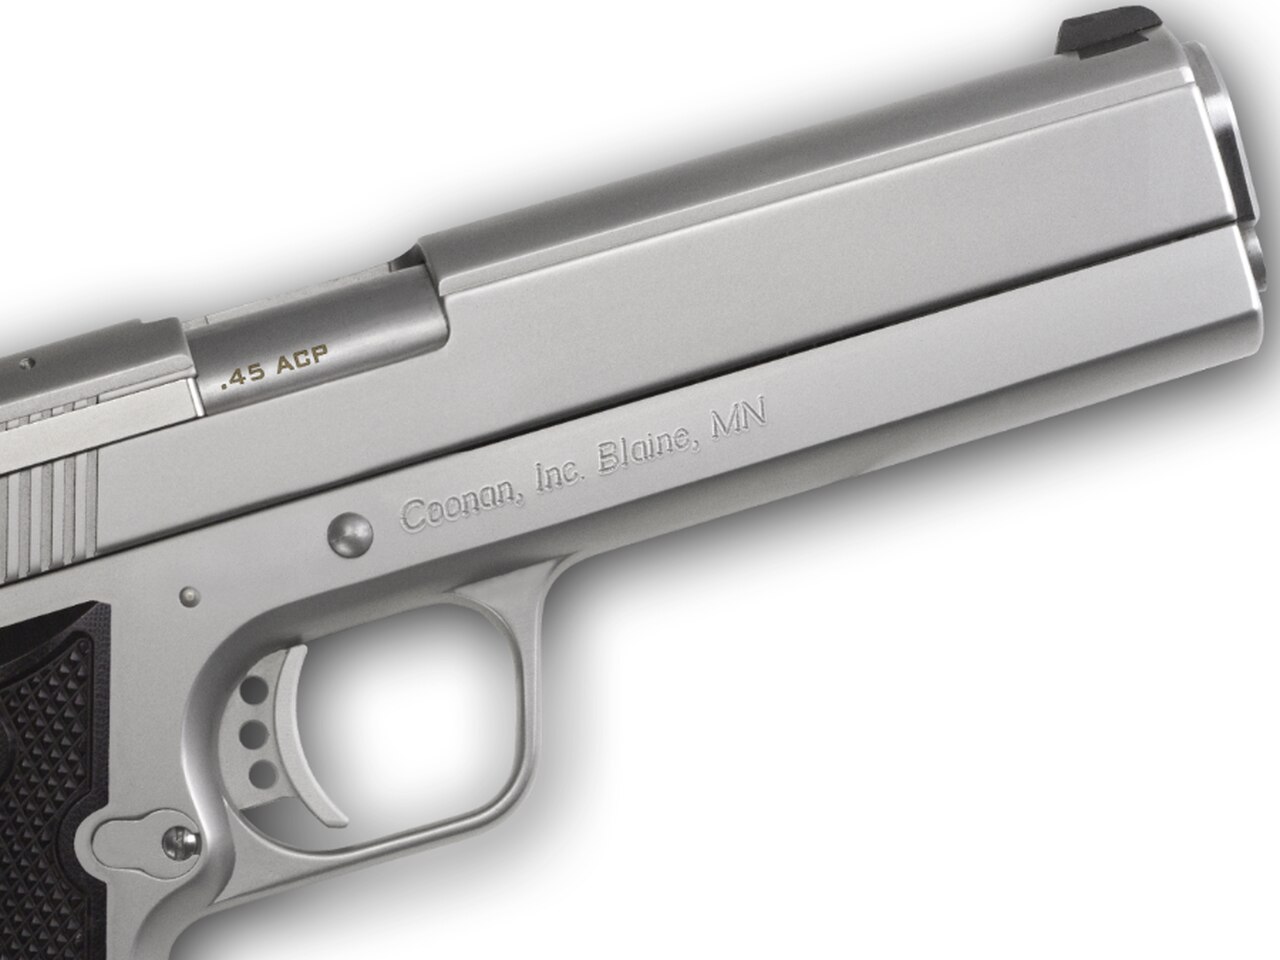 Image of Coonan MOT 45 ACP, 5", Satin Stainless, Fixed Black Sights, Black Alum Grips, 1 Mag (Special Order)